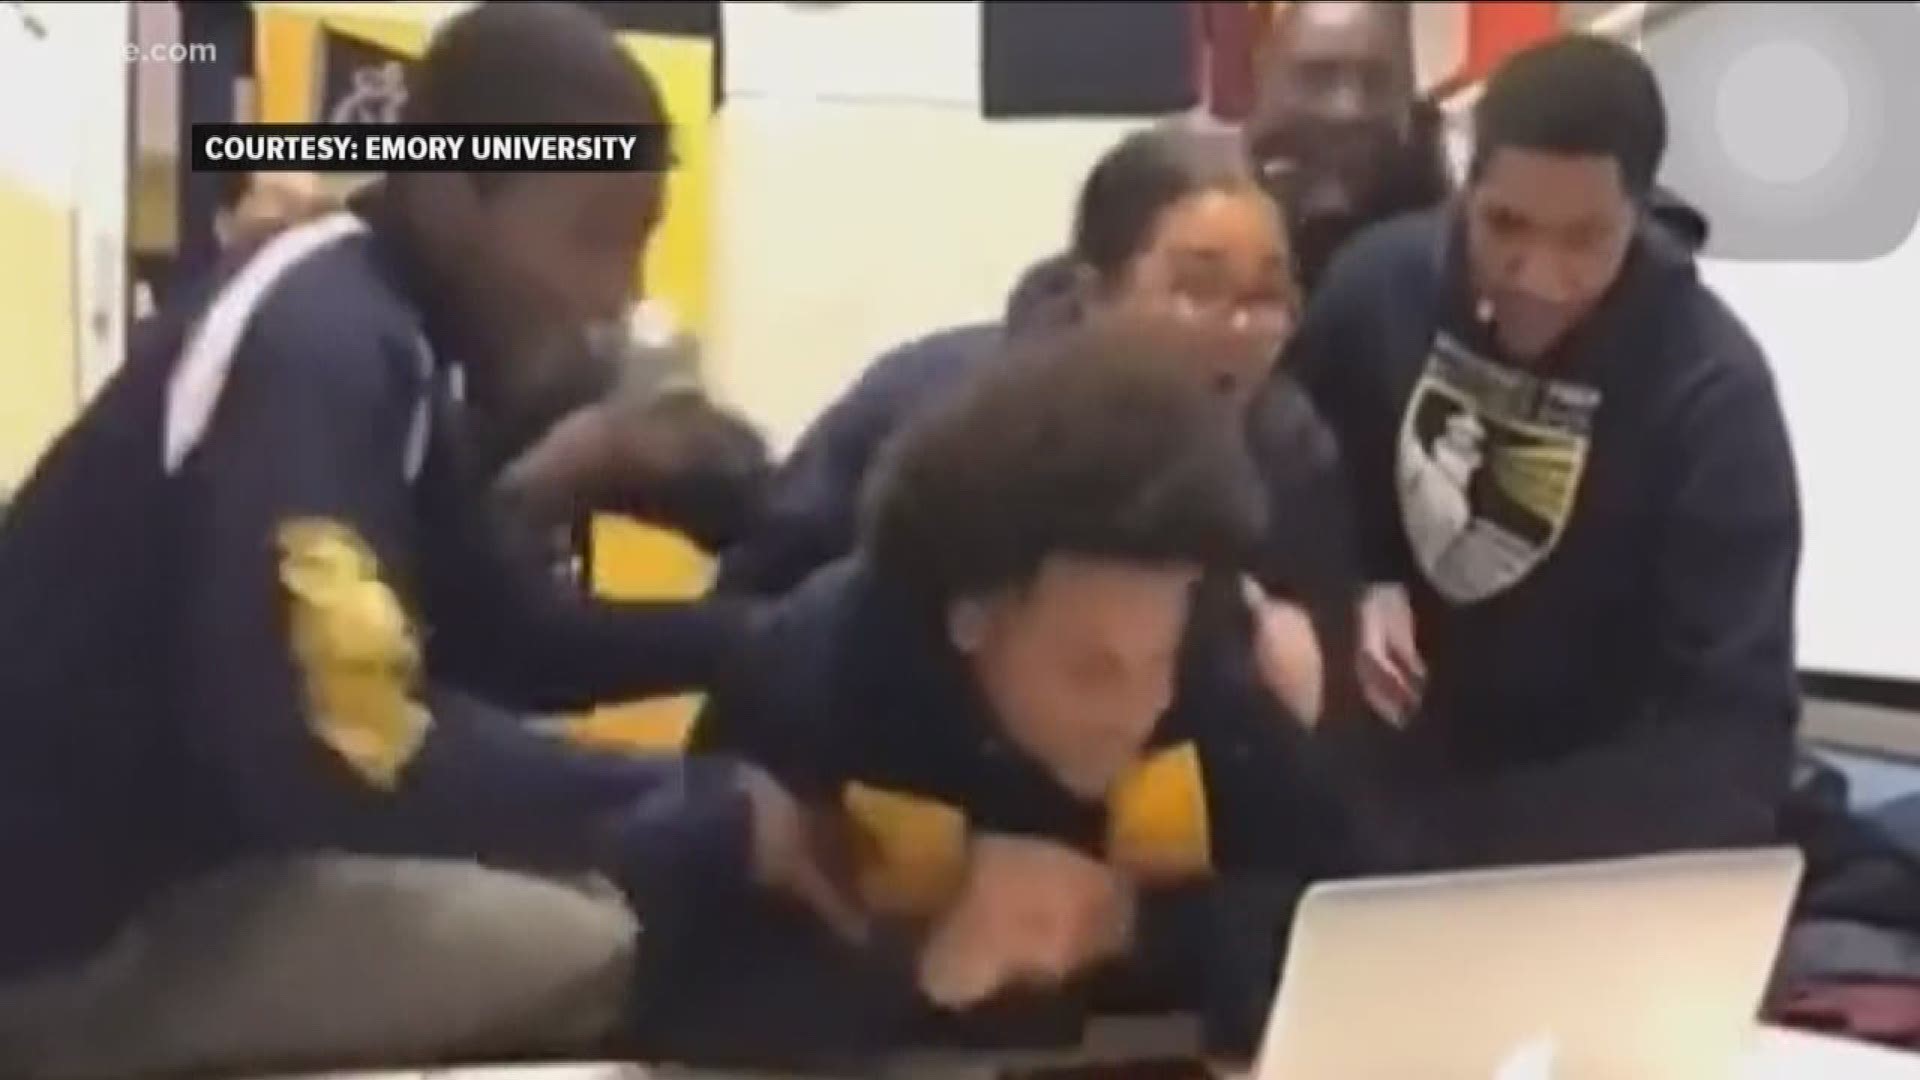 These are the reactions from students who found out they were accepted to a school that's very hard to get into. They were accepted for early decision admission and will start in fall 2019.